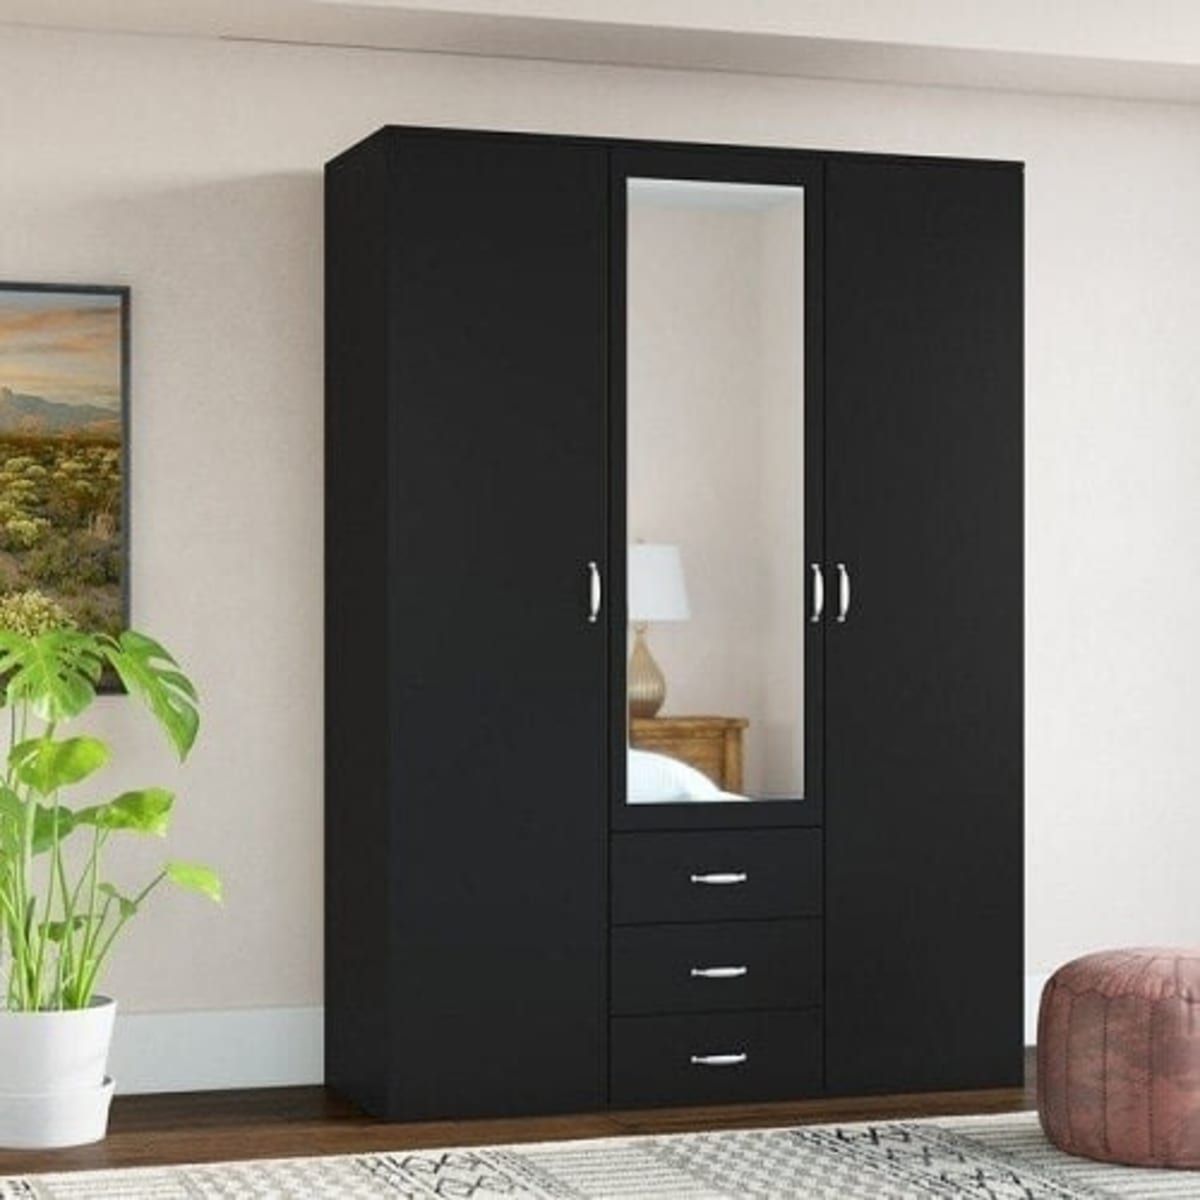 Beyond 3 Door Wardrobe With 3 Drawer And Mirror Black | Konga Online  Shopping With Regard To Wardrobes With 3 Drawers (View 9 of 15)